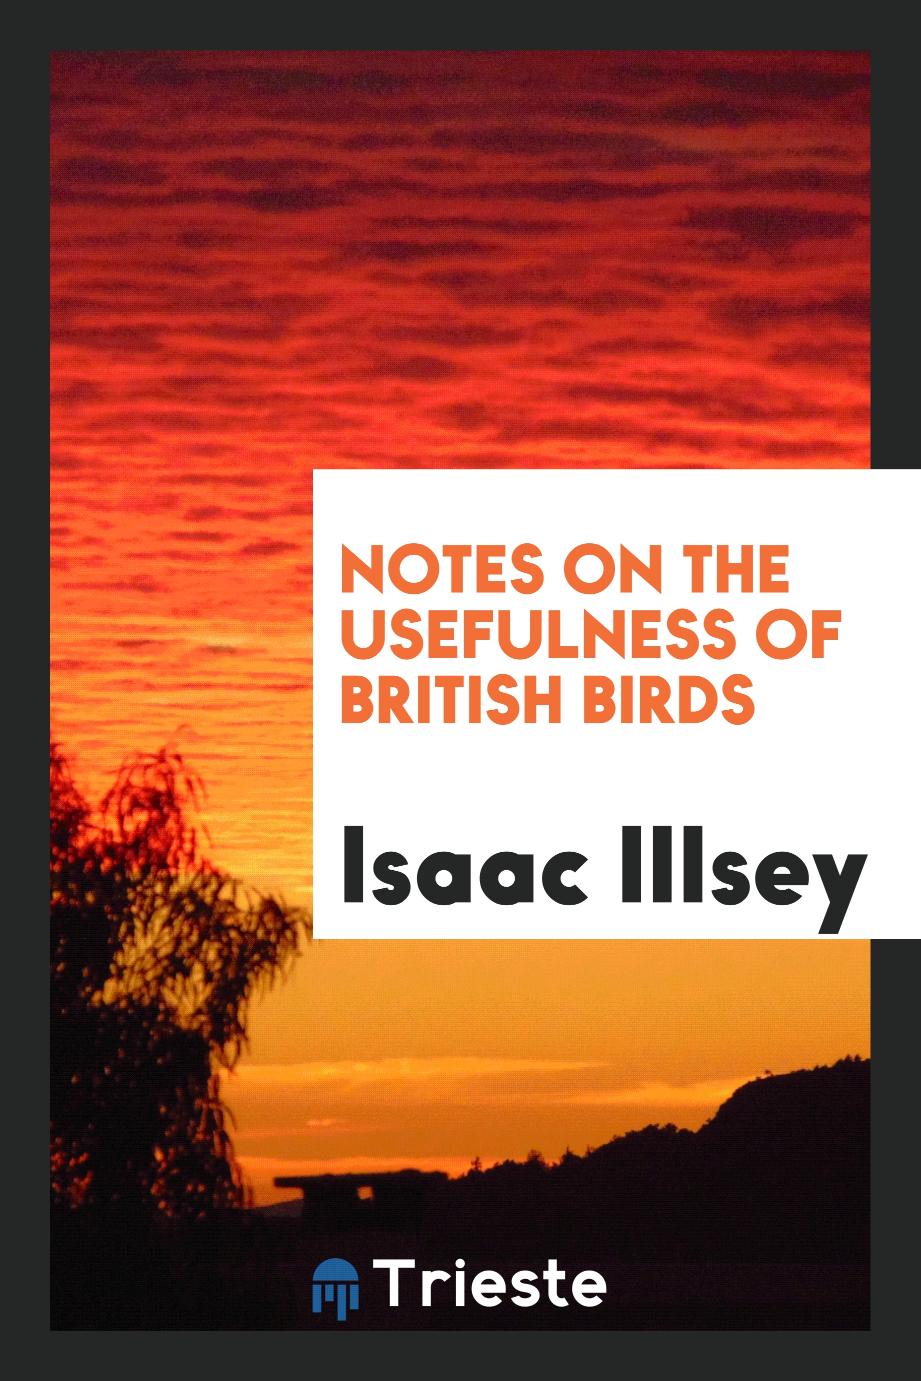 Notes on the usefulness of British birds